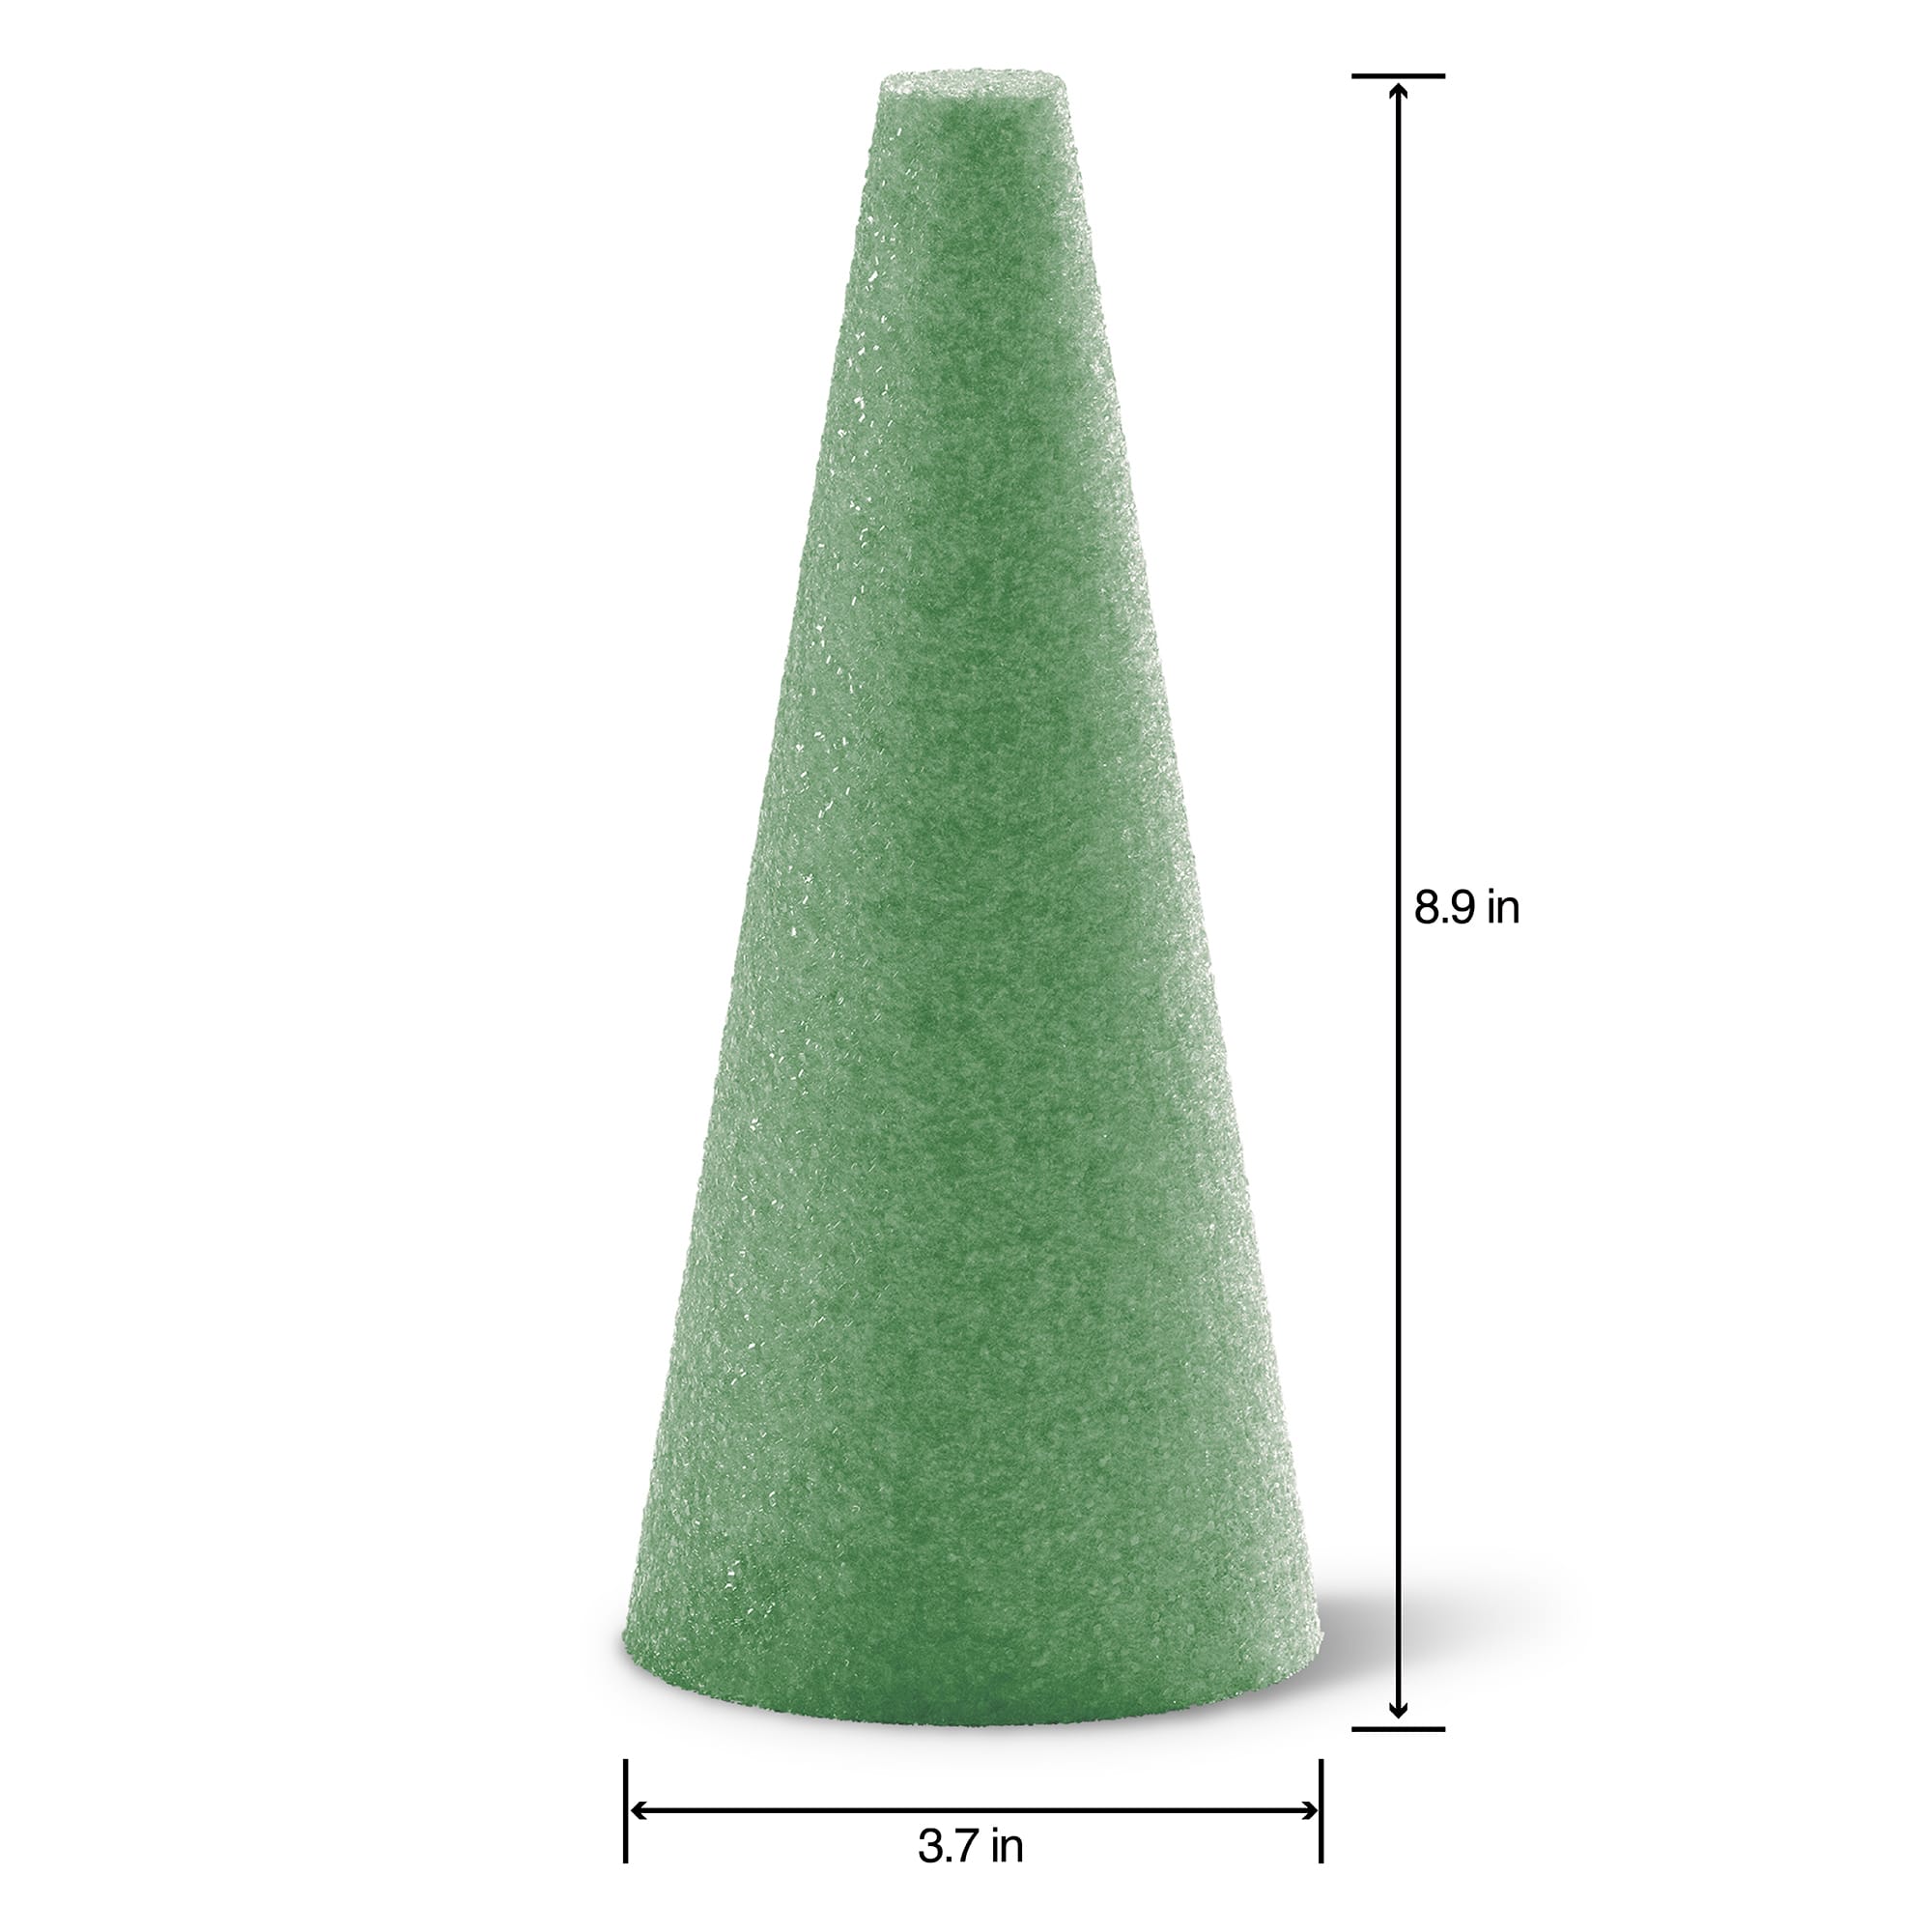 Styrofoam Cones for Crafts Dry Floral Foam Cones 8.9 inches Artificial Flowers Each Craft Cone Measures 8.9 x 3.8 Green Styrofoam Cone and Cemetery vases 